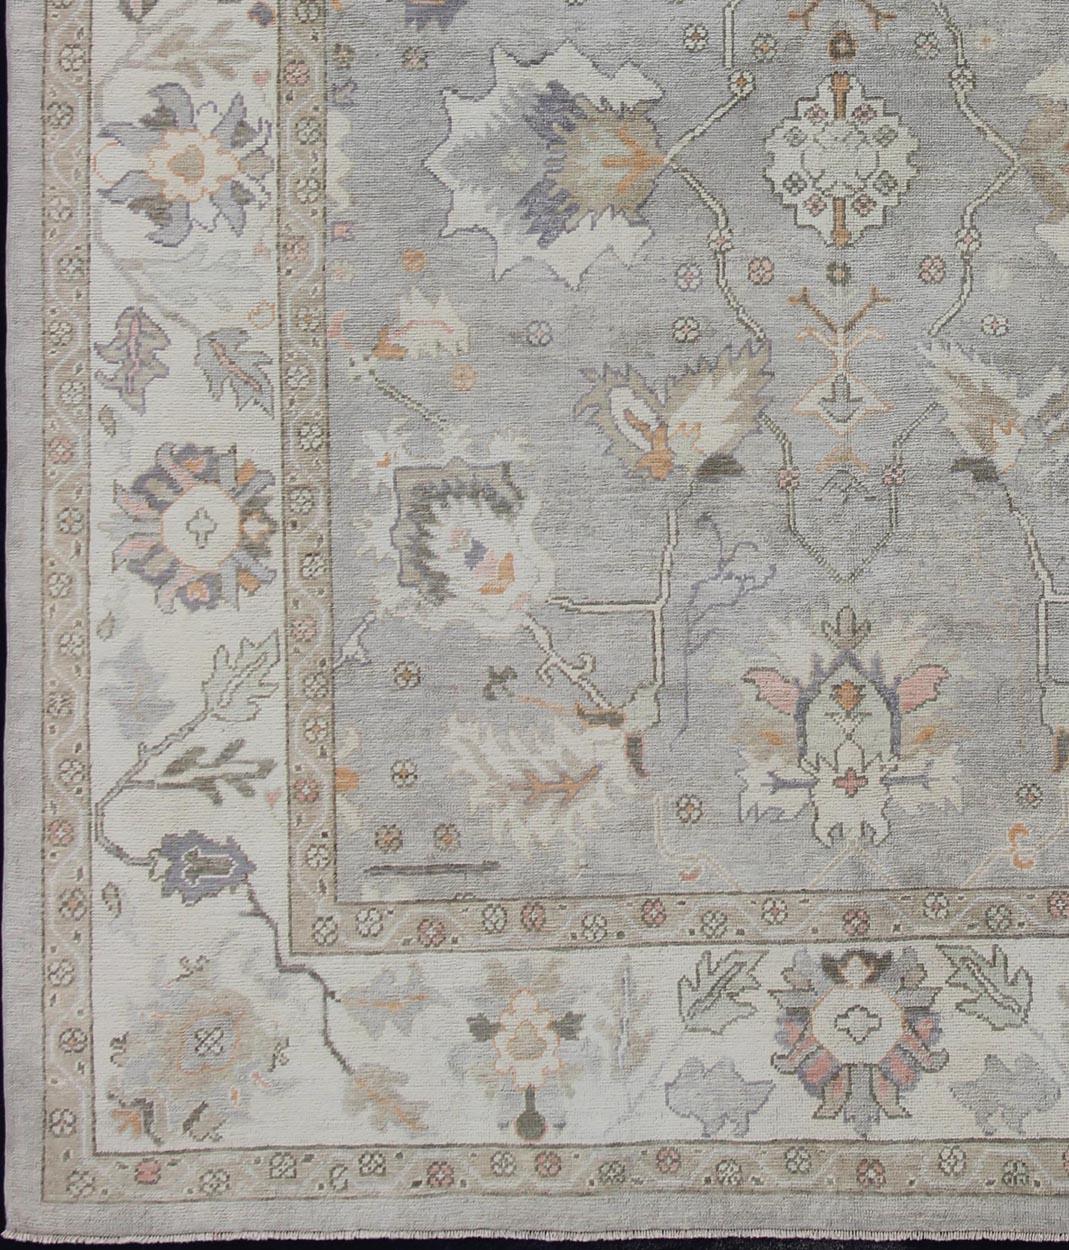 Turkish Oushak rug with neutral color palette and all-over flower design, rug en-176558, country of origin / type: Turkey / Oushak

This traditional Oushak rug from Turkey features a subdued, neutral color palette and an all-over design of floral